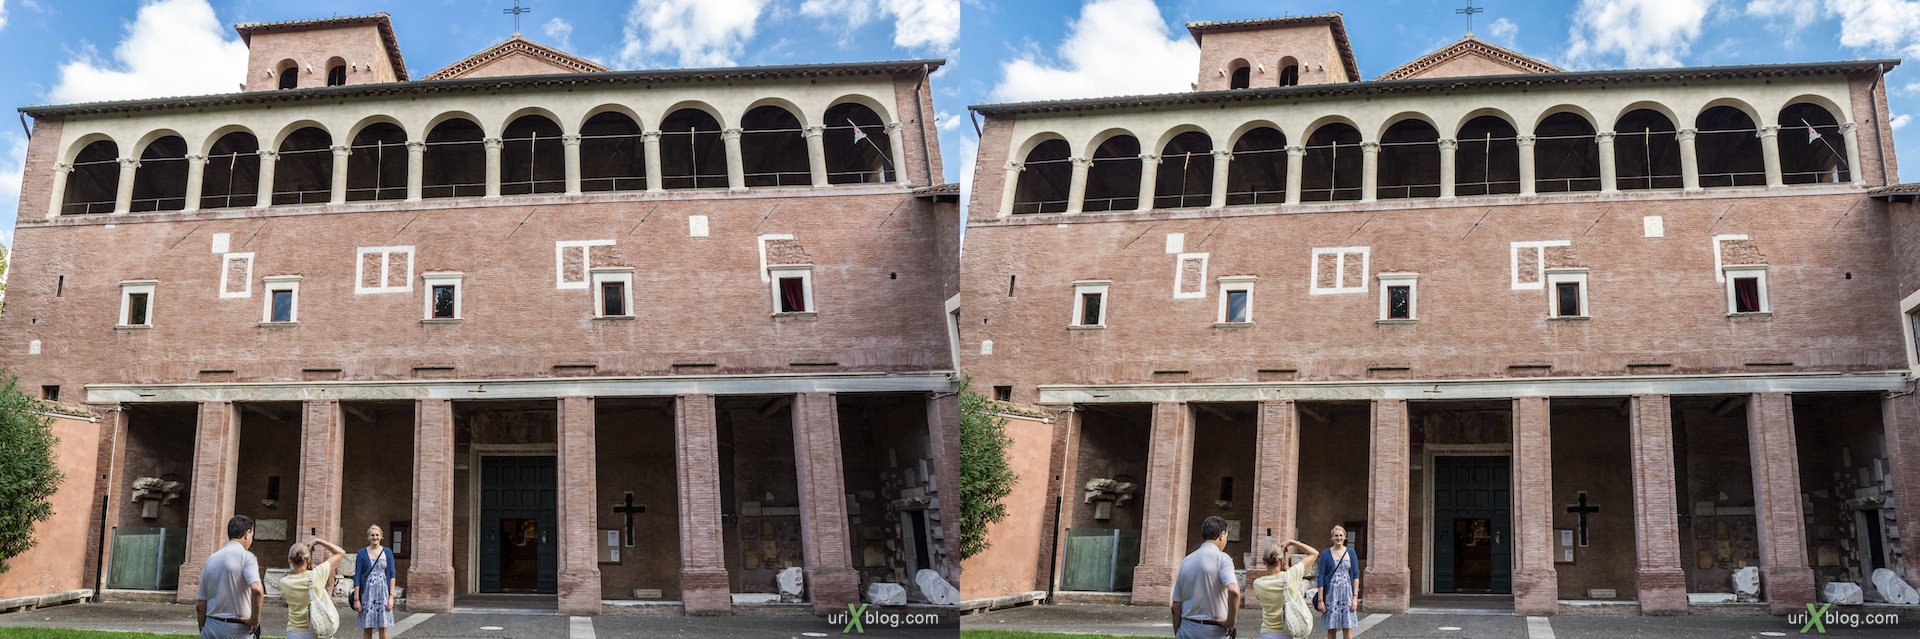 2012, basilica di San Saba, church, Rome, Italy, cathedral, monastery, Christianity, Catholicism, 3D, stereo pair, cross-eyed, crossview, cross view stereo pair